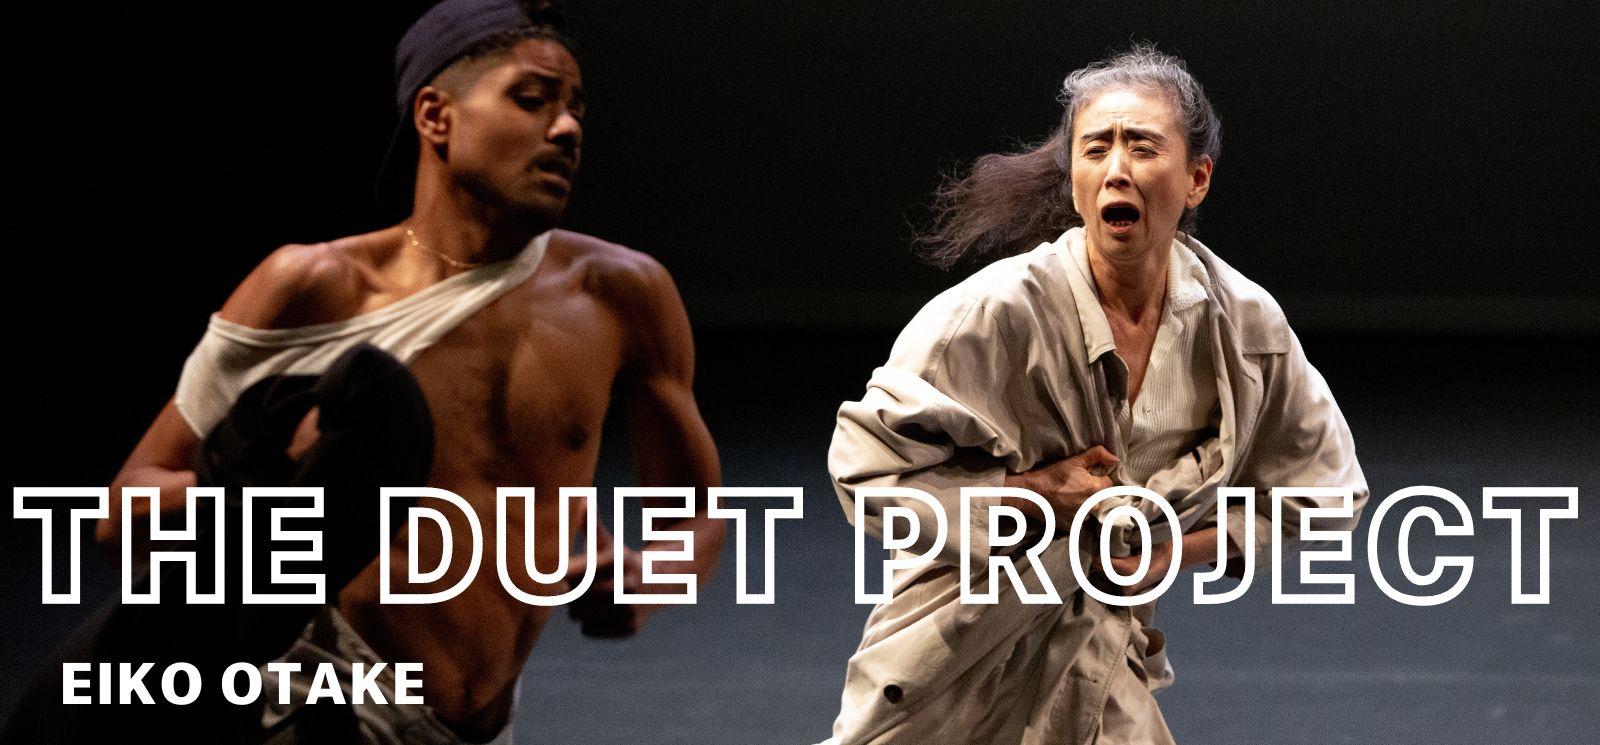 The Duet Project